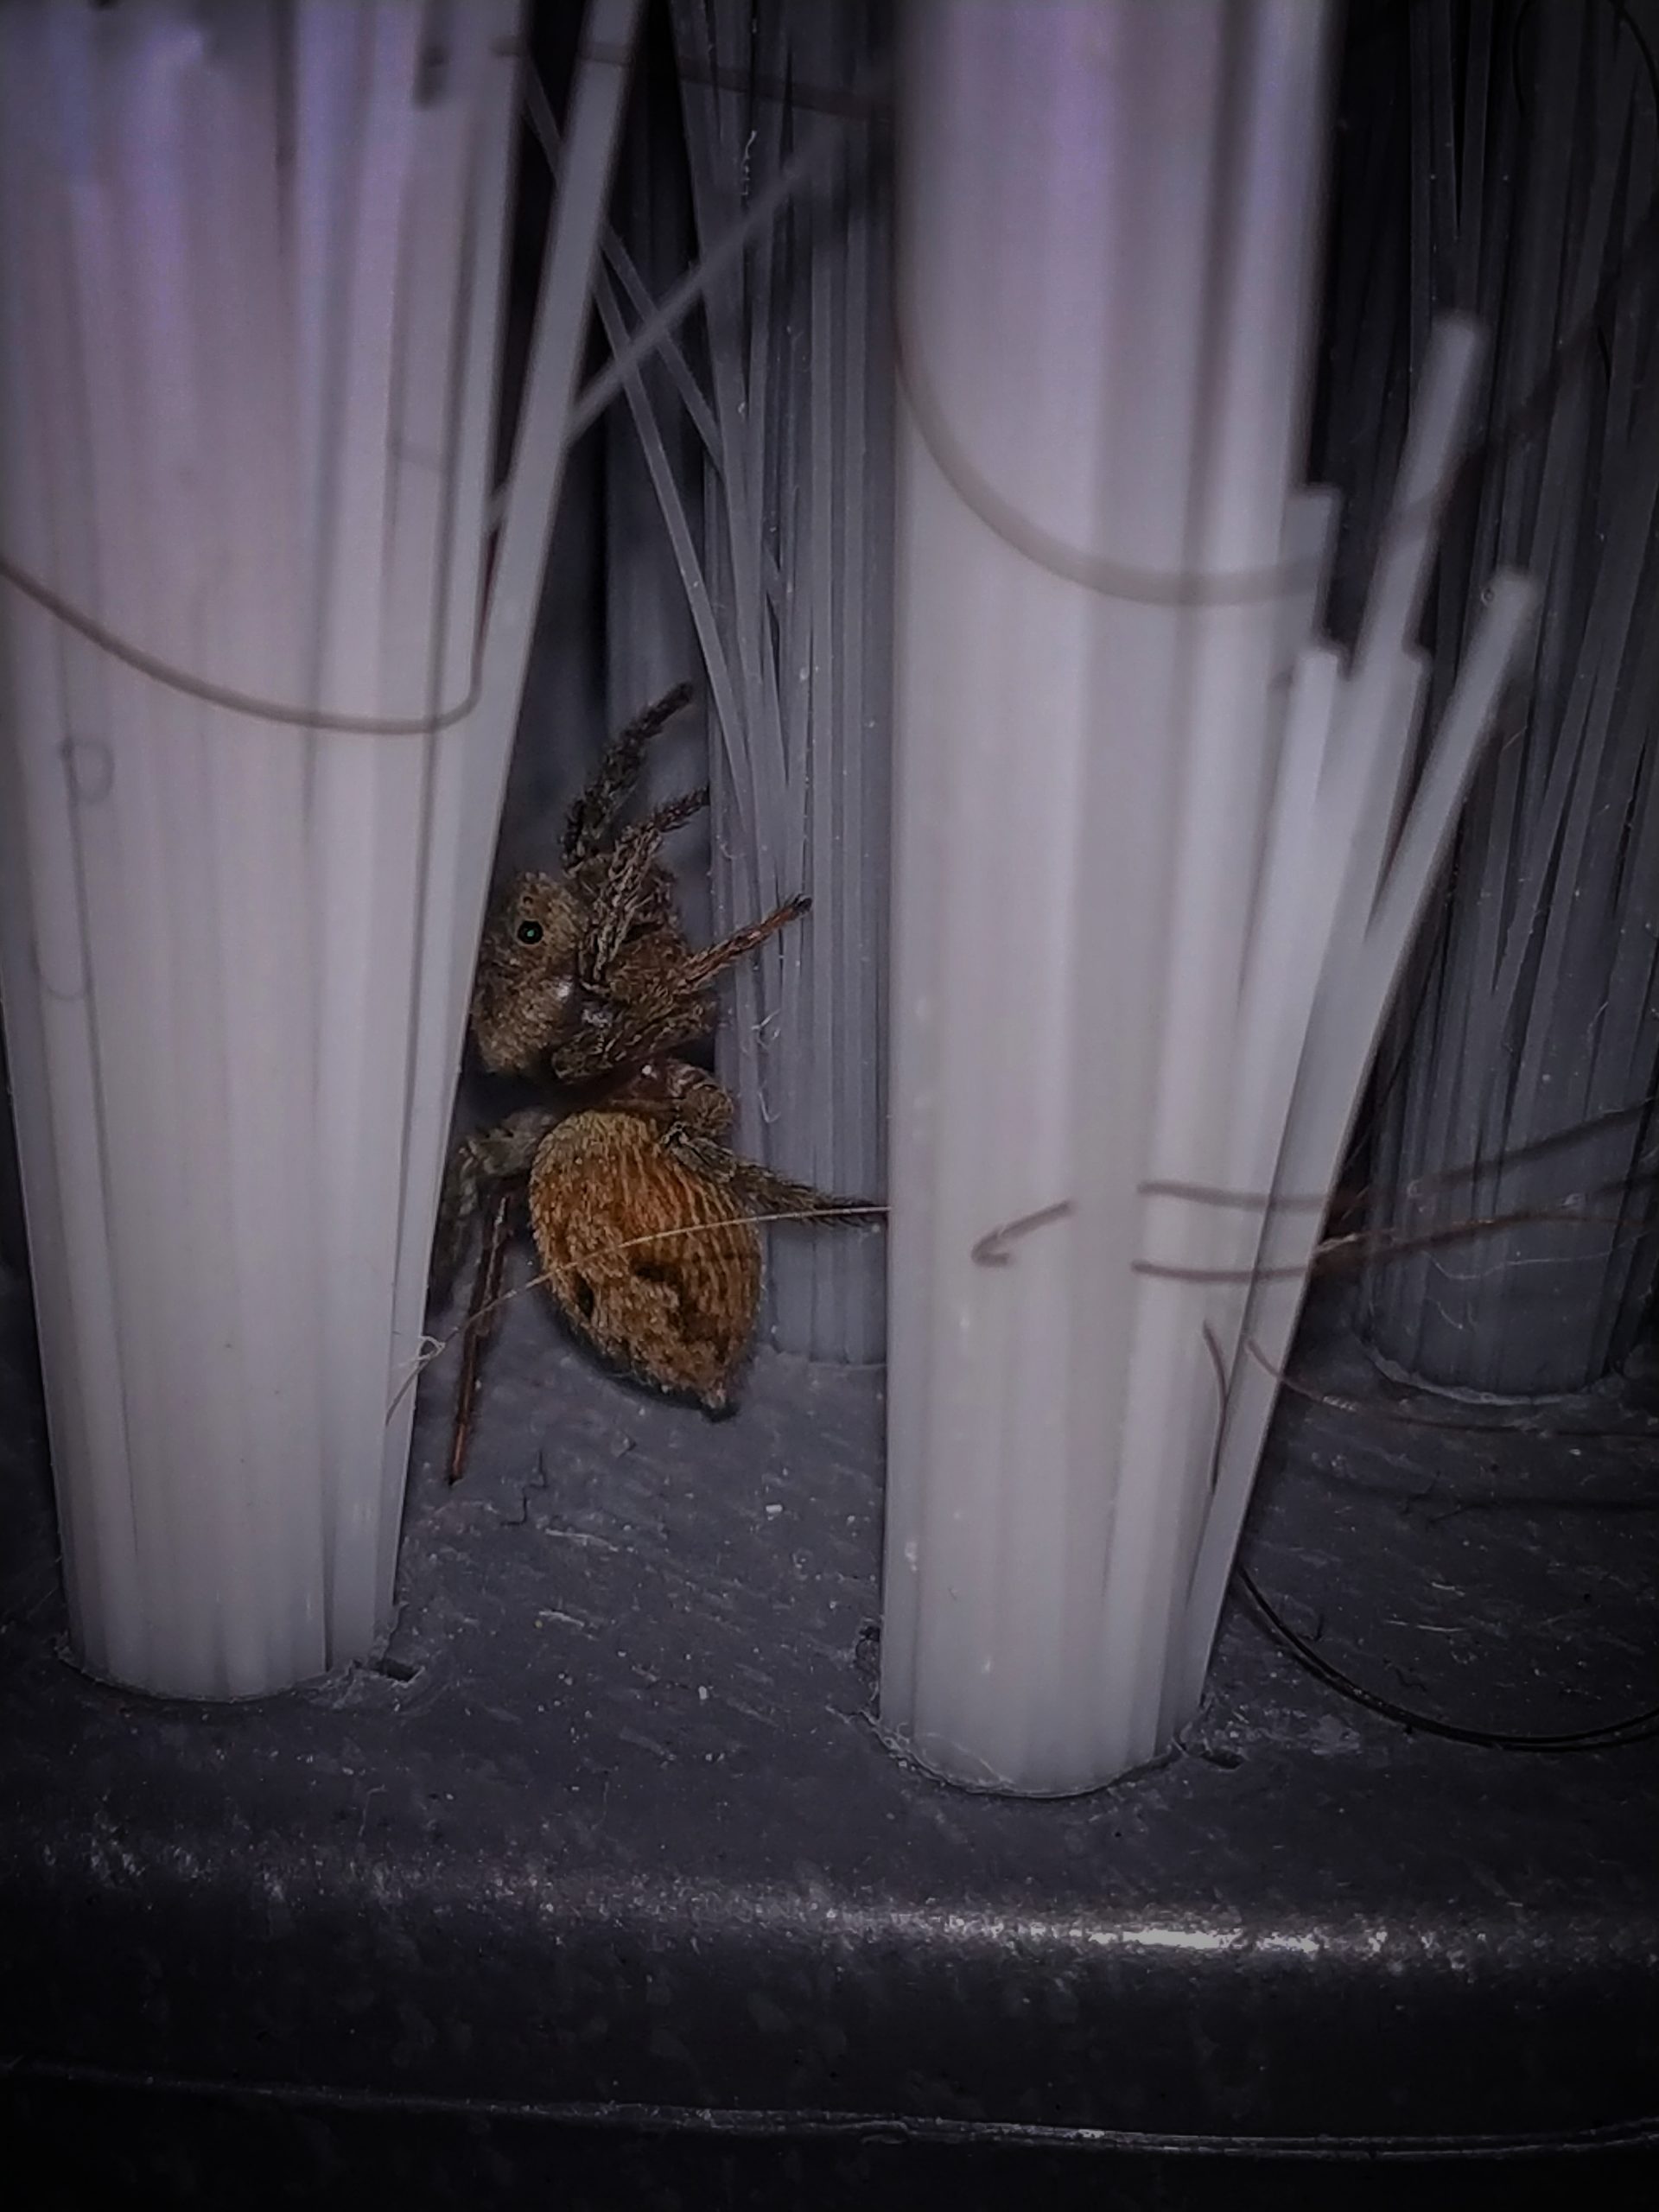 Spider in a Laundry Brush